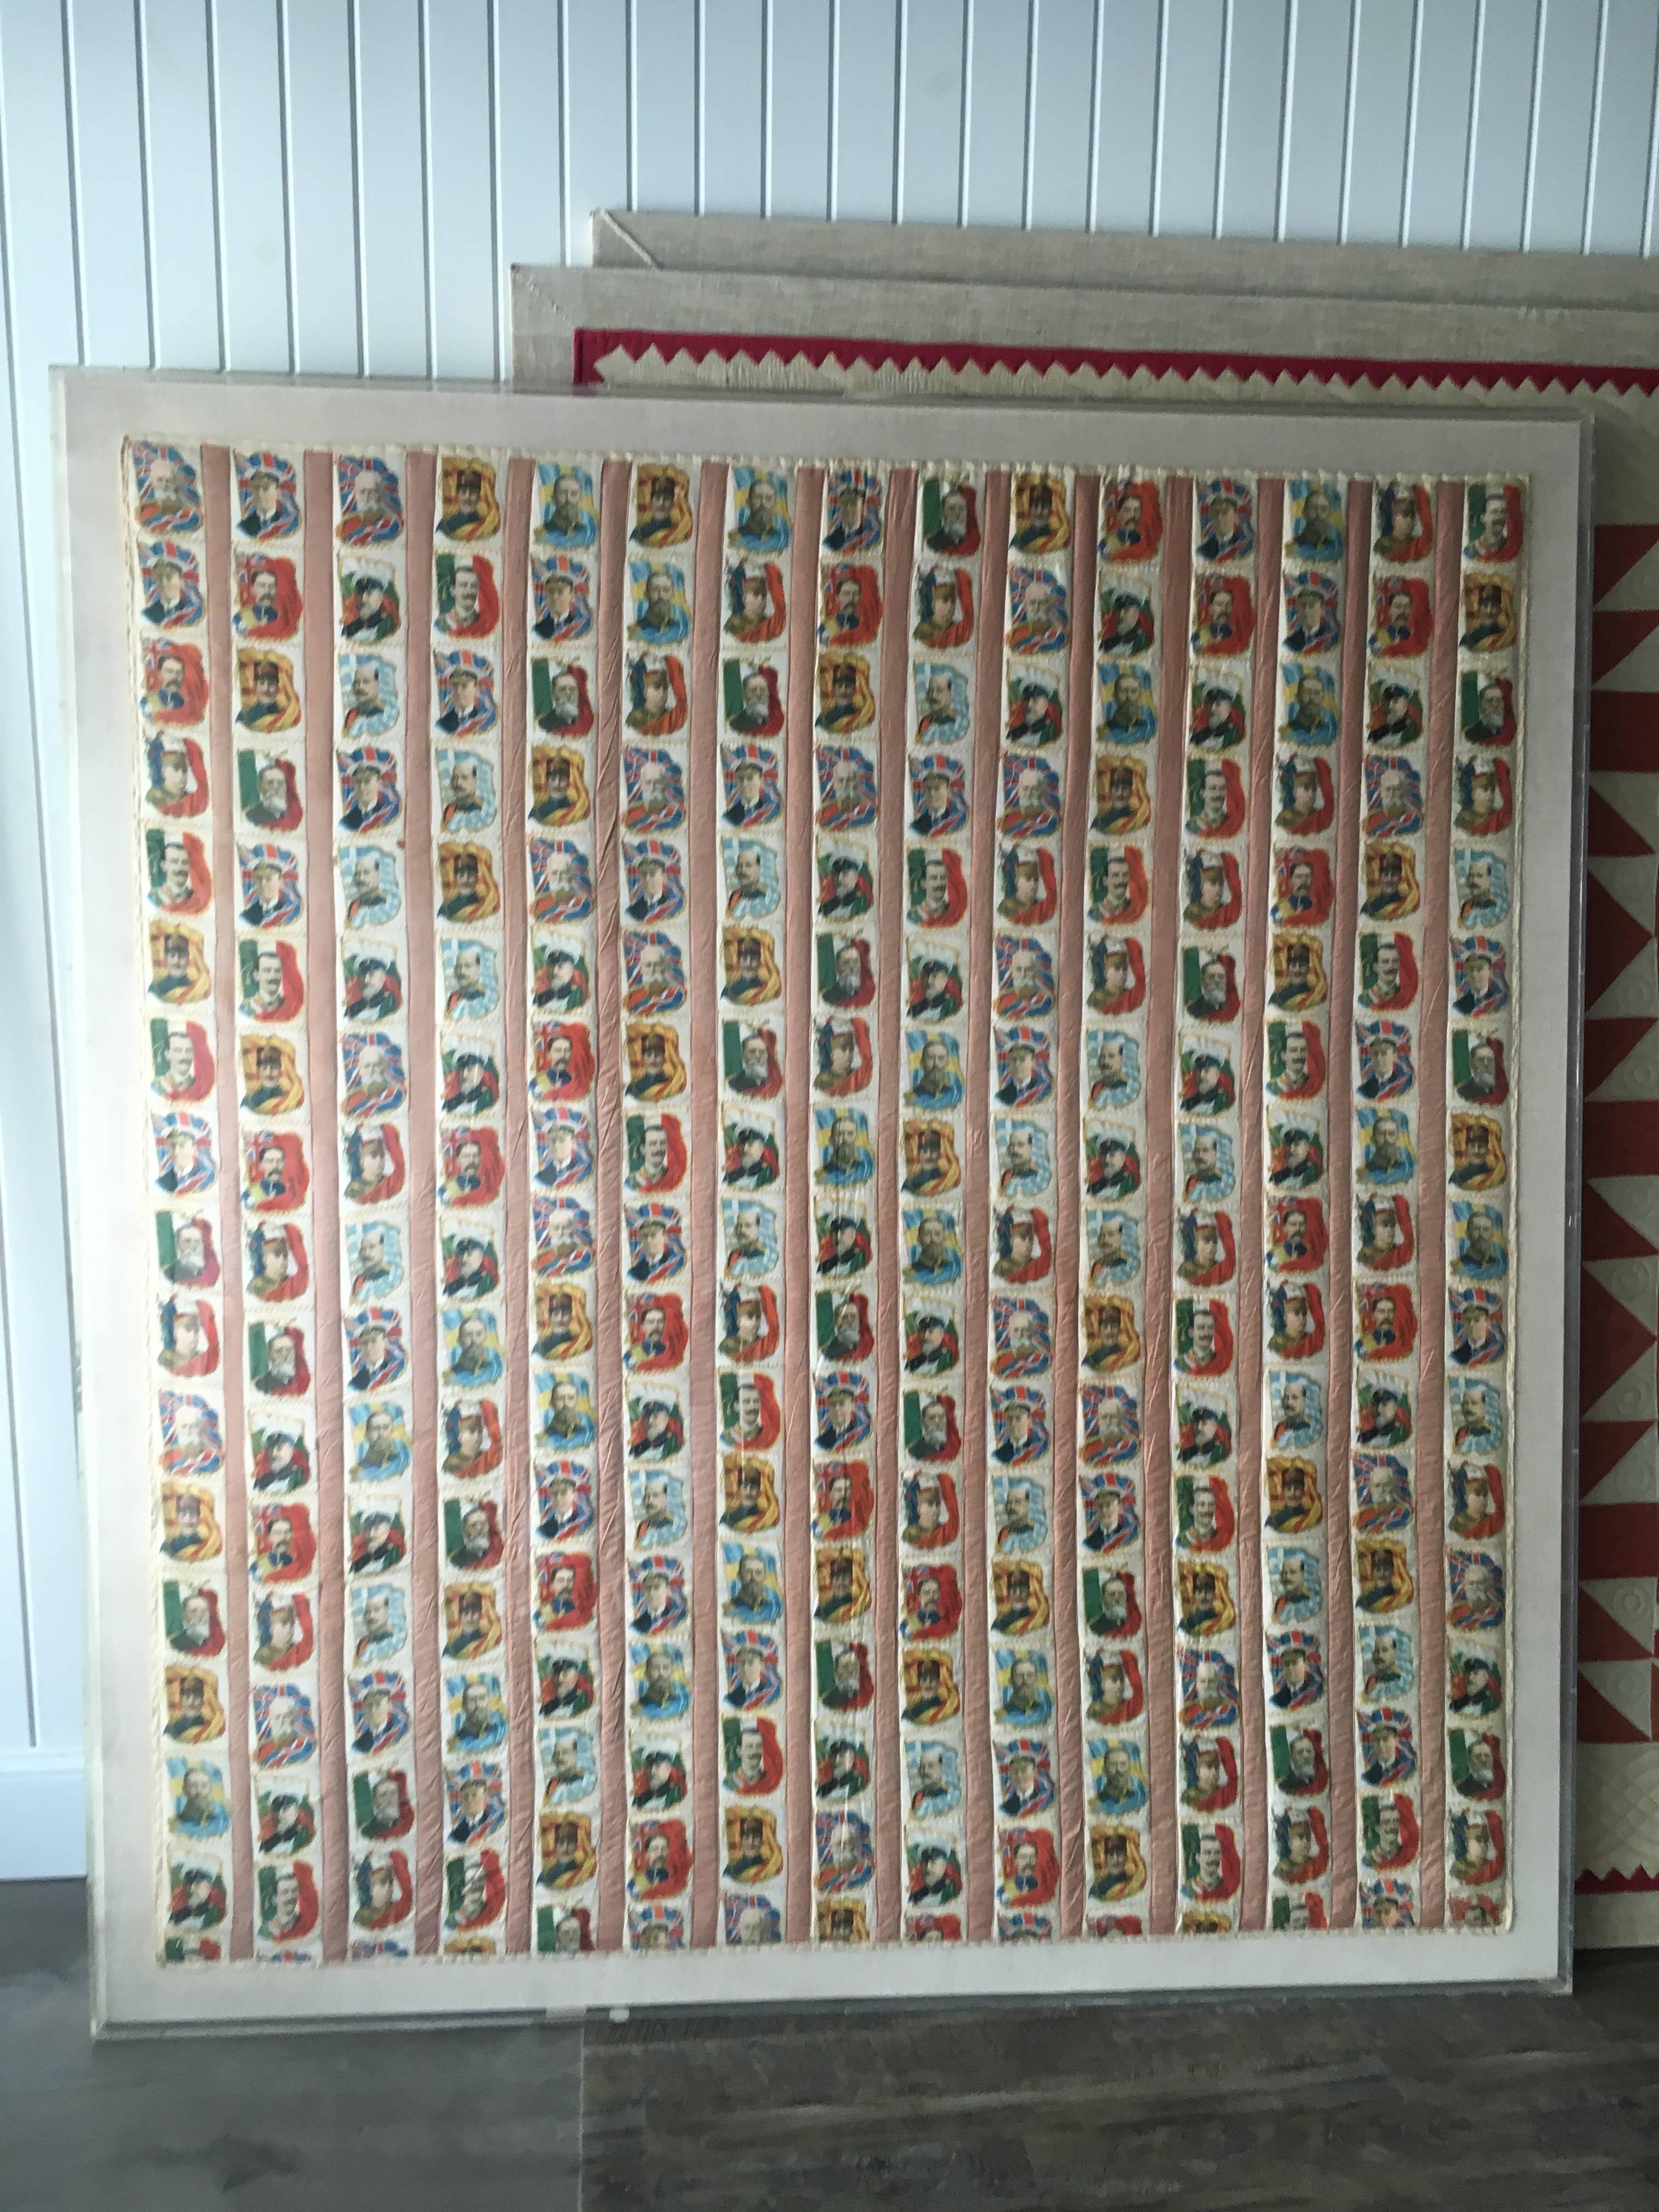 Imperial Tobacco Company of Canada silk trading cards quilt mounted on canvas. Featuring silk cigarette cards in the Rulers with Flags series, dating 1910. The cards are hand sewn in strips and then machine mounted on a cloth quilted backing
Quilt: